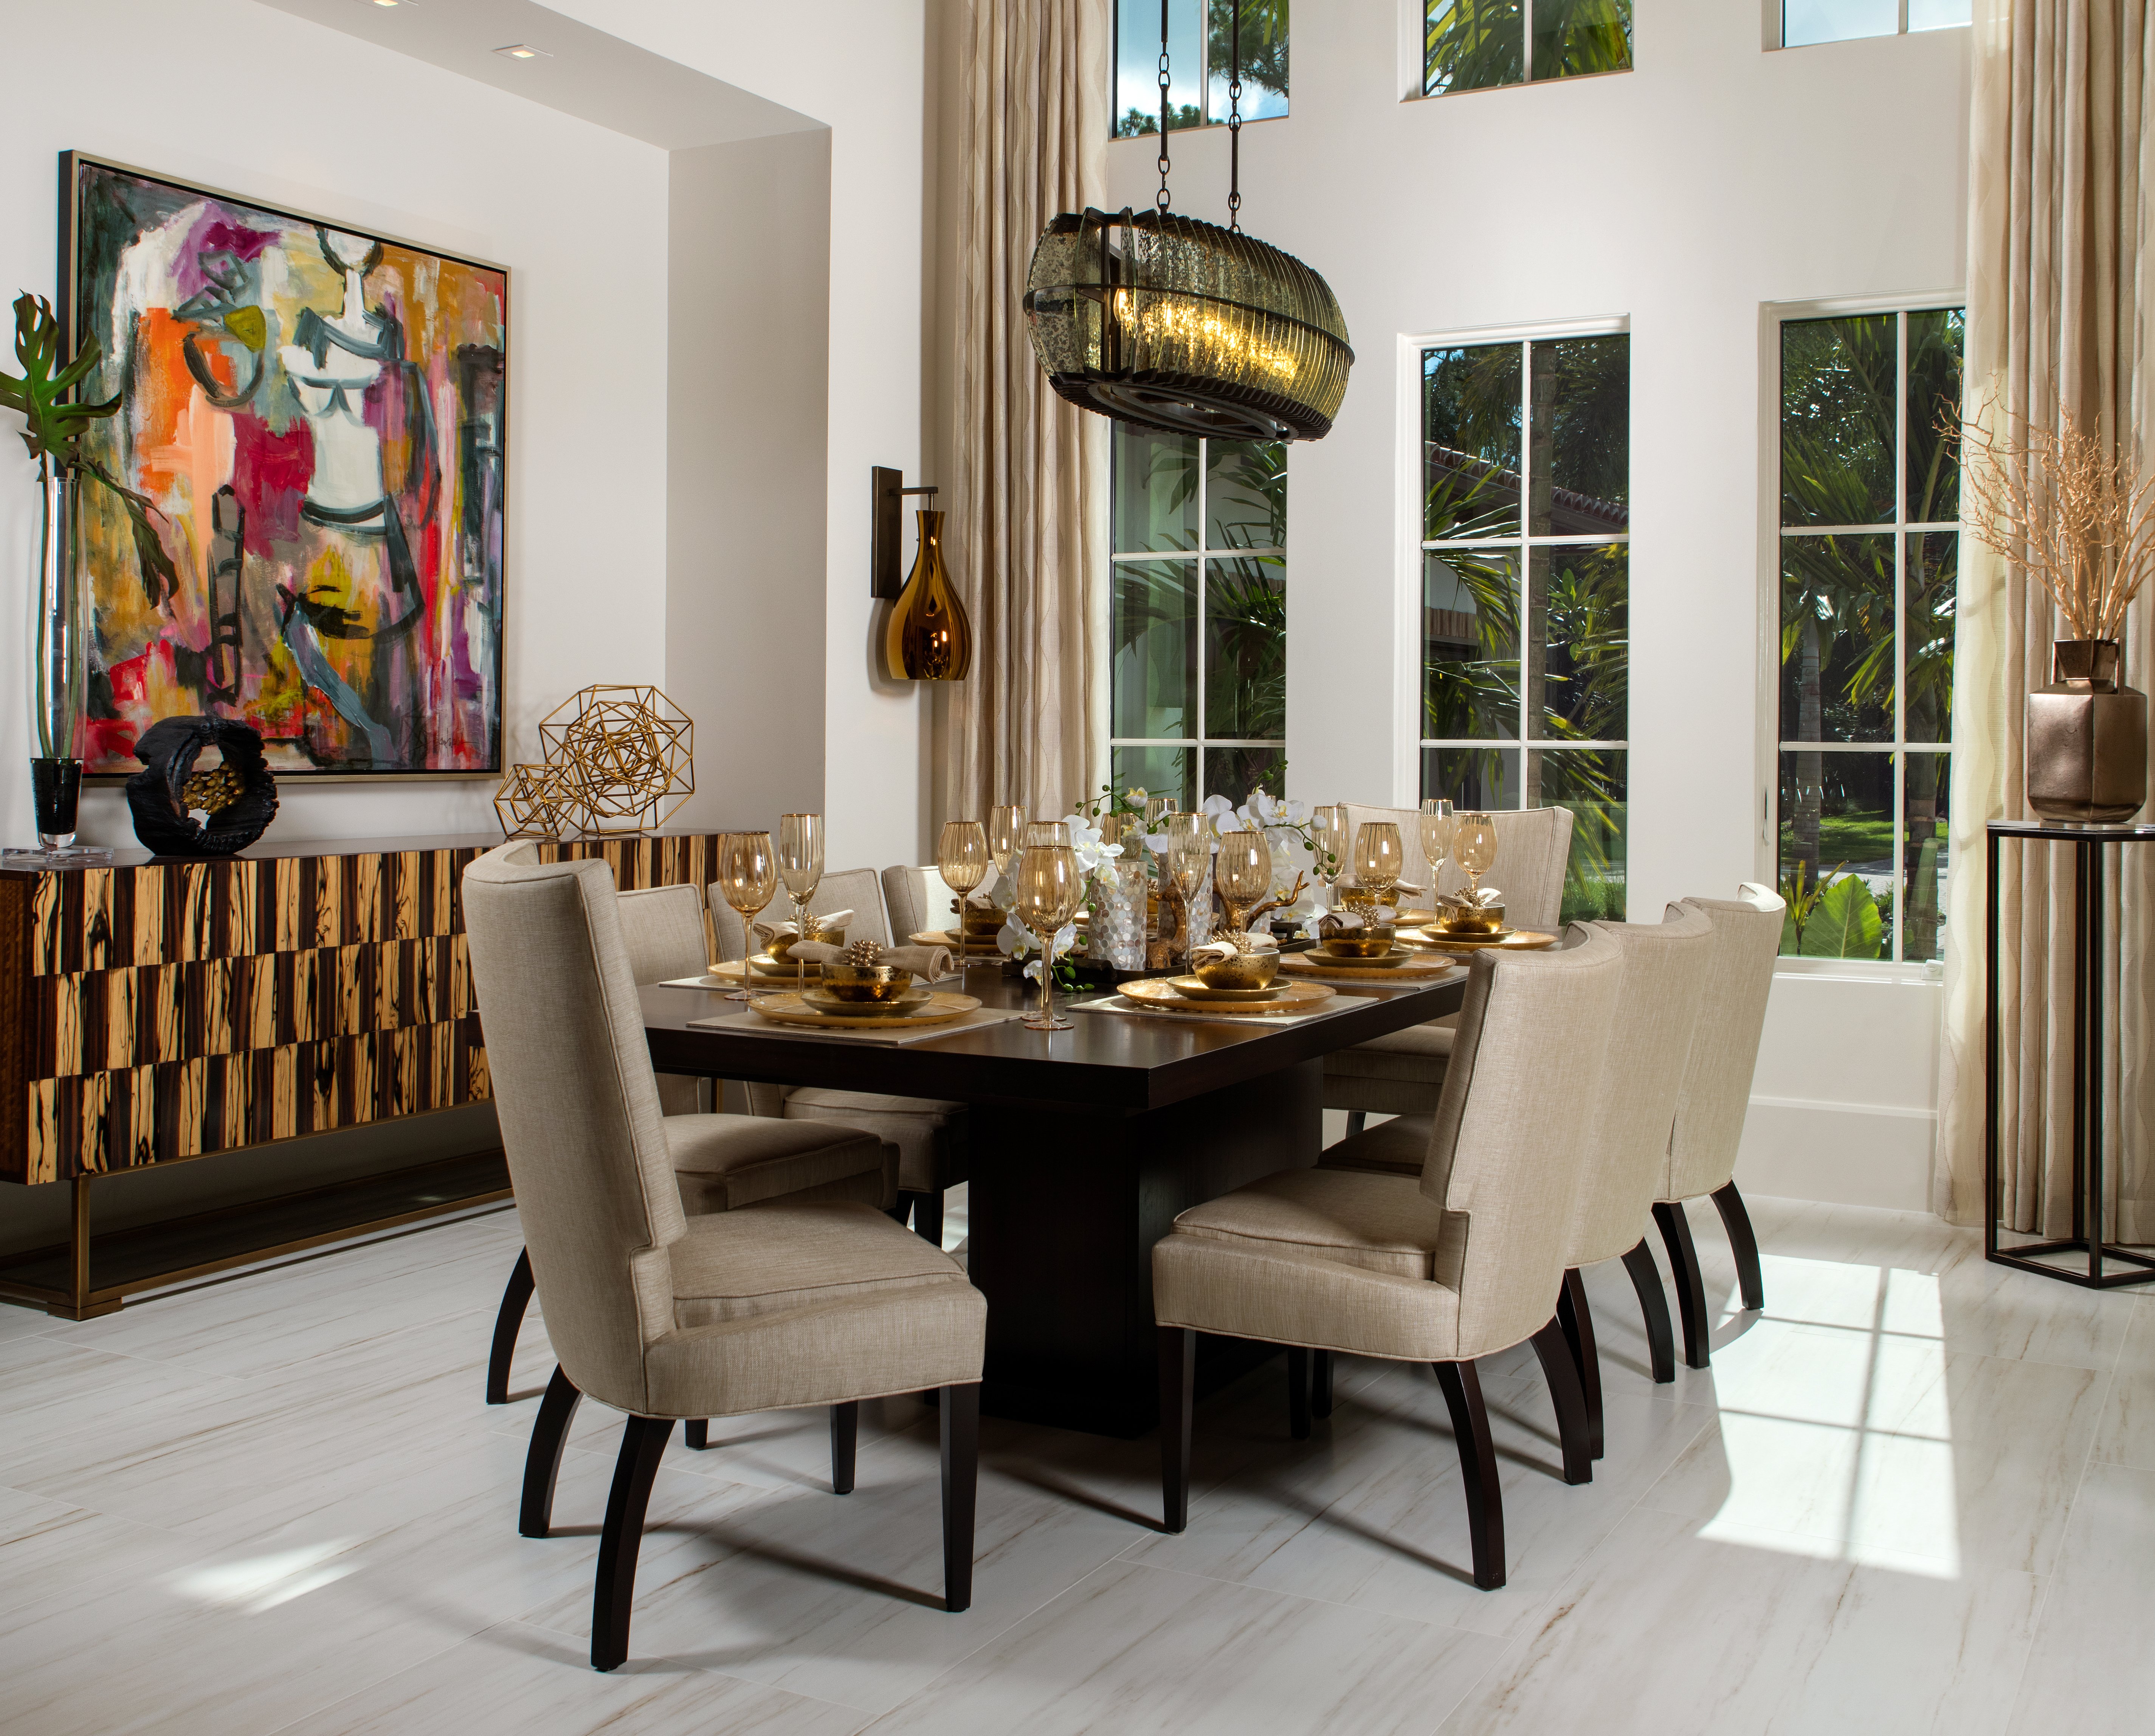 How to Set a Beautiful Holiday Dining Room Table in Your Mediterra Home